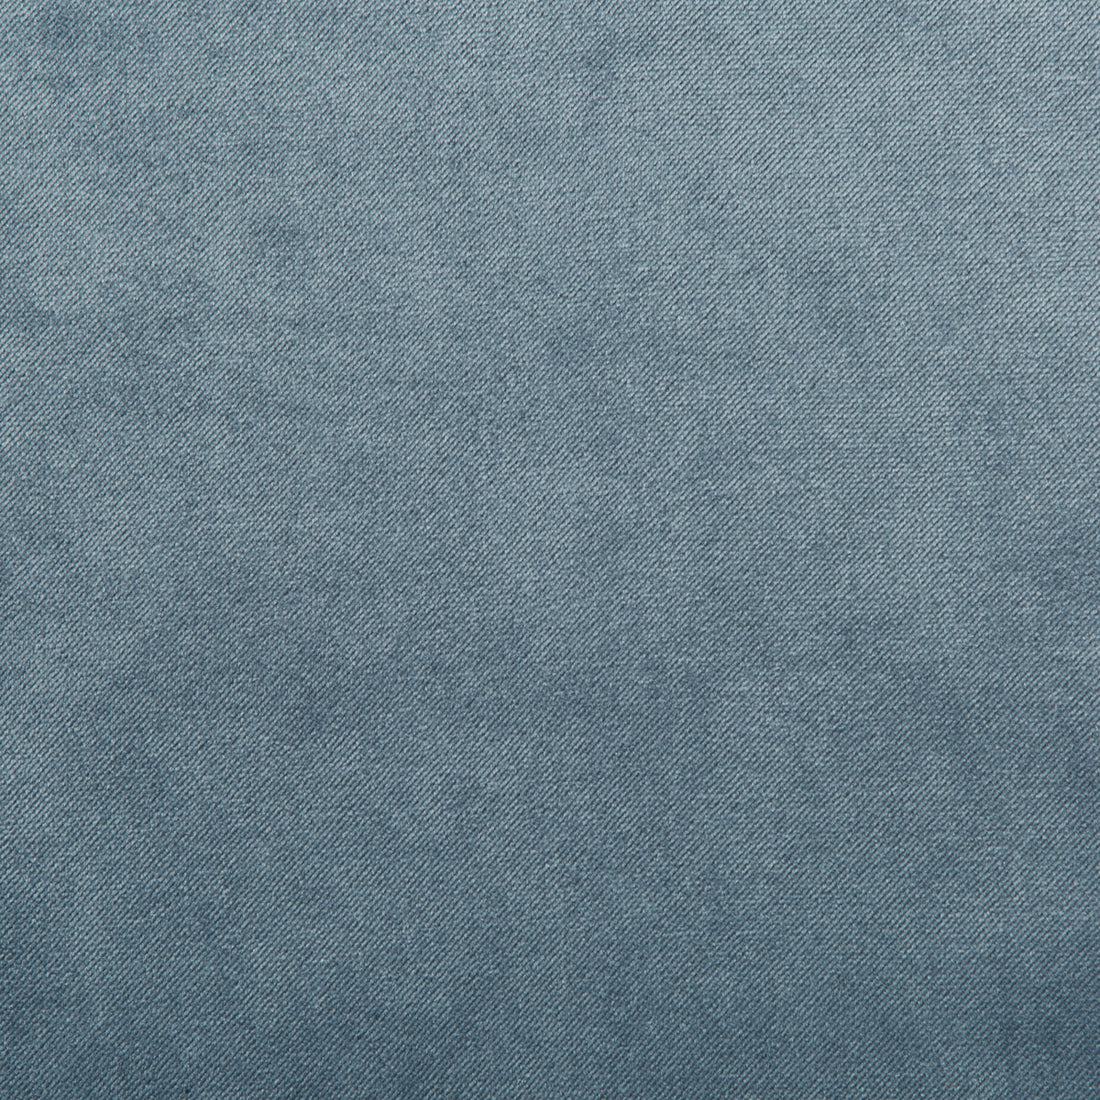 Madison Velvet fabric in moody blue color - pattern 35402.5.0 - by Kravet Contract